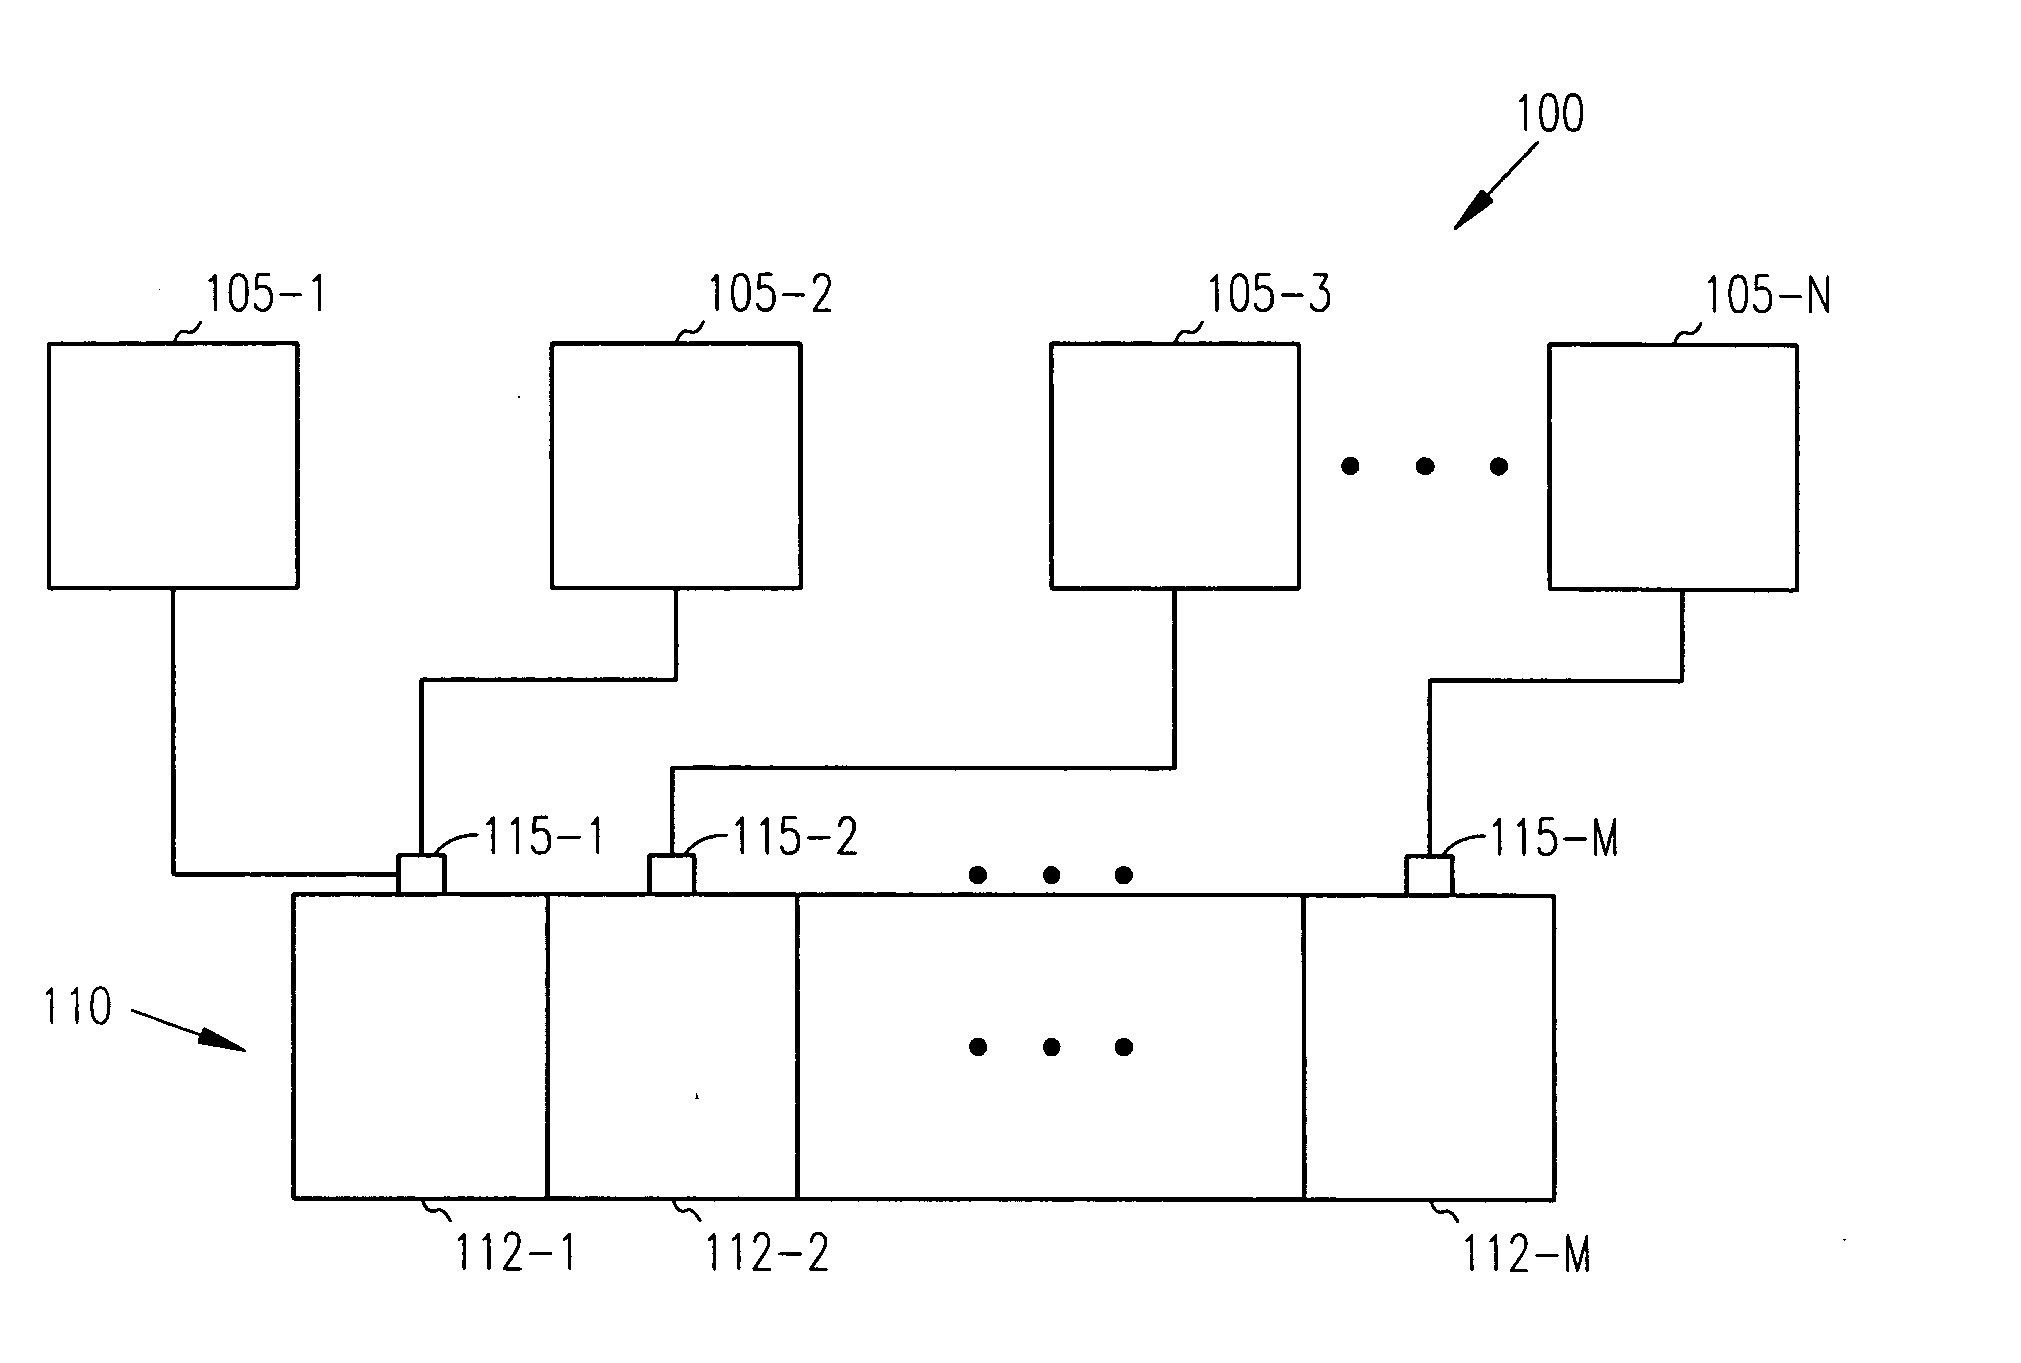 Supply source providing multiple supply voltages